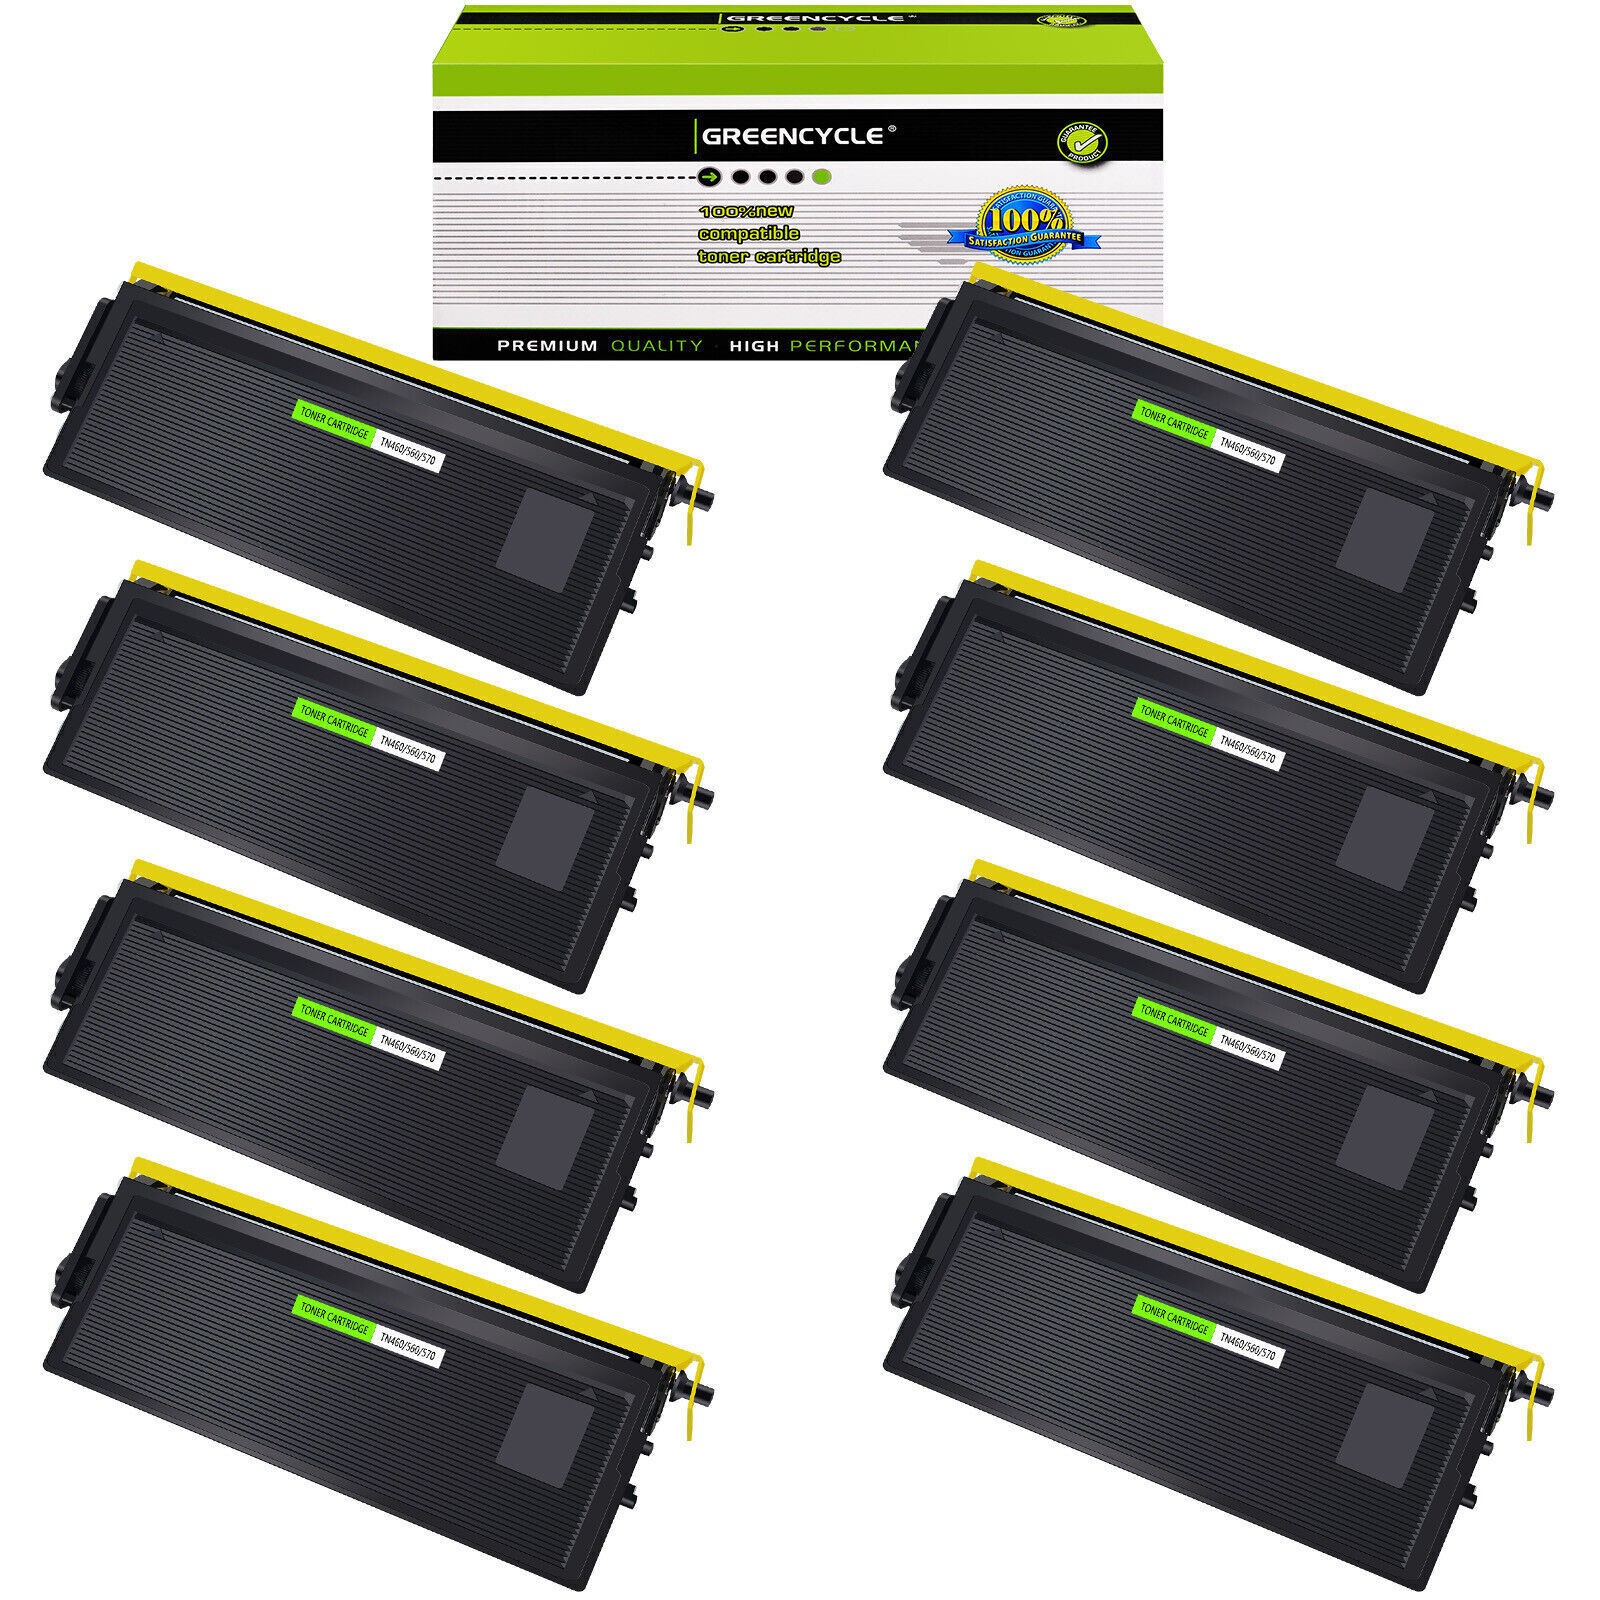 8PK High Yield Compatible Toner Cartridge for Brother TN560 DCP-8020 / DCP-8025D